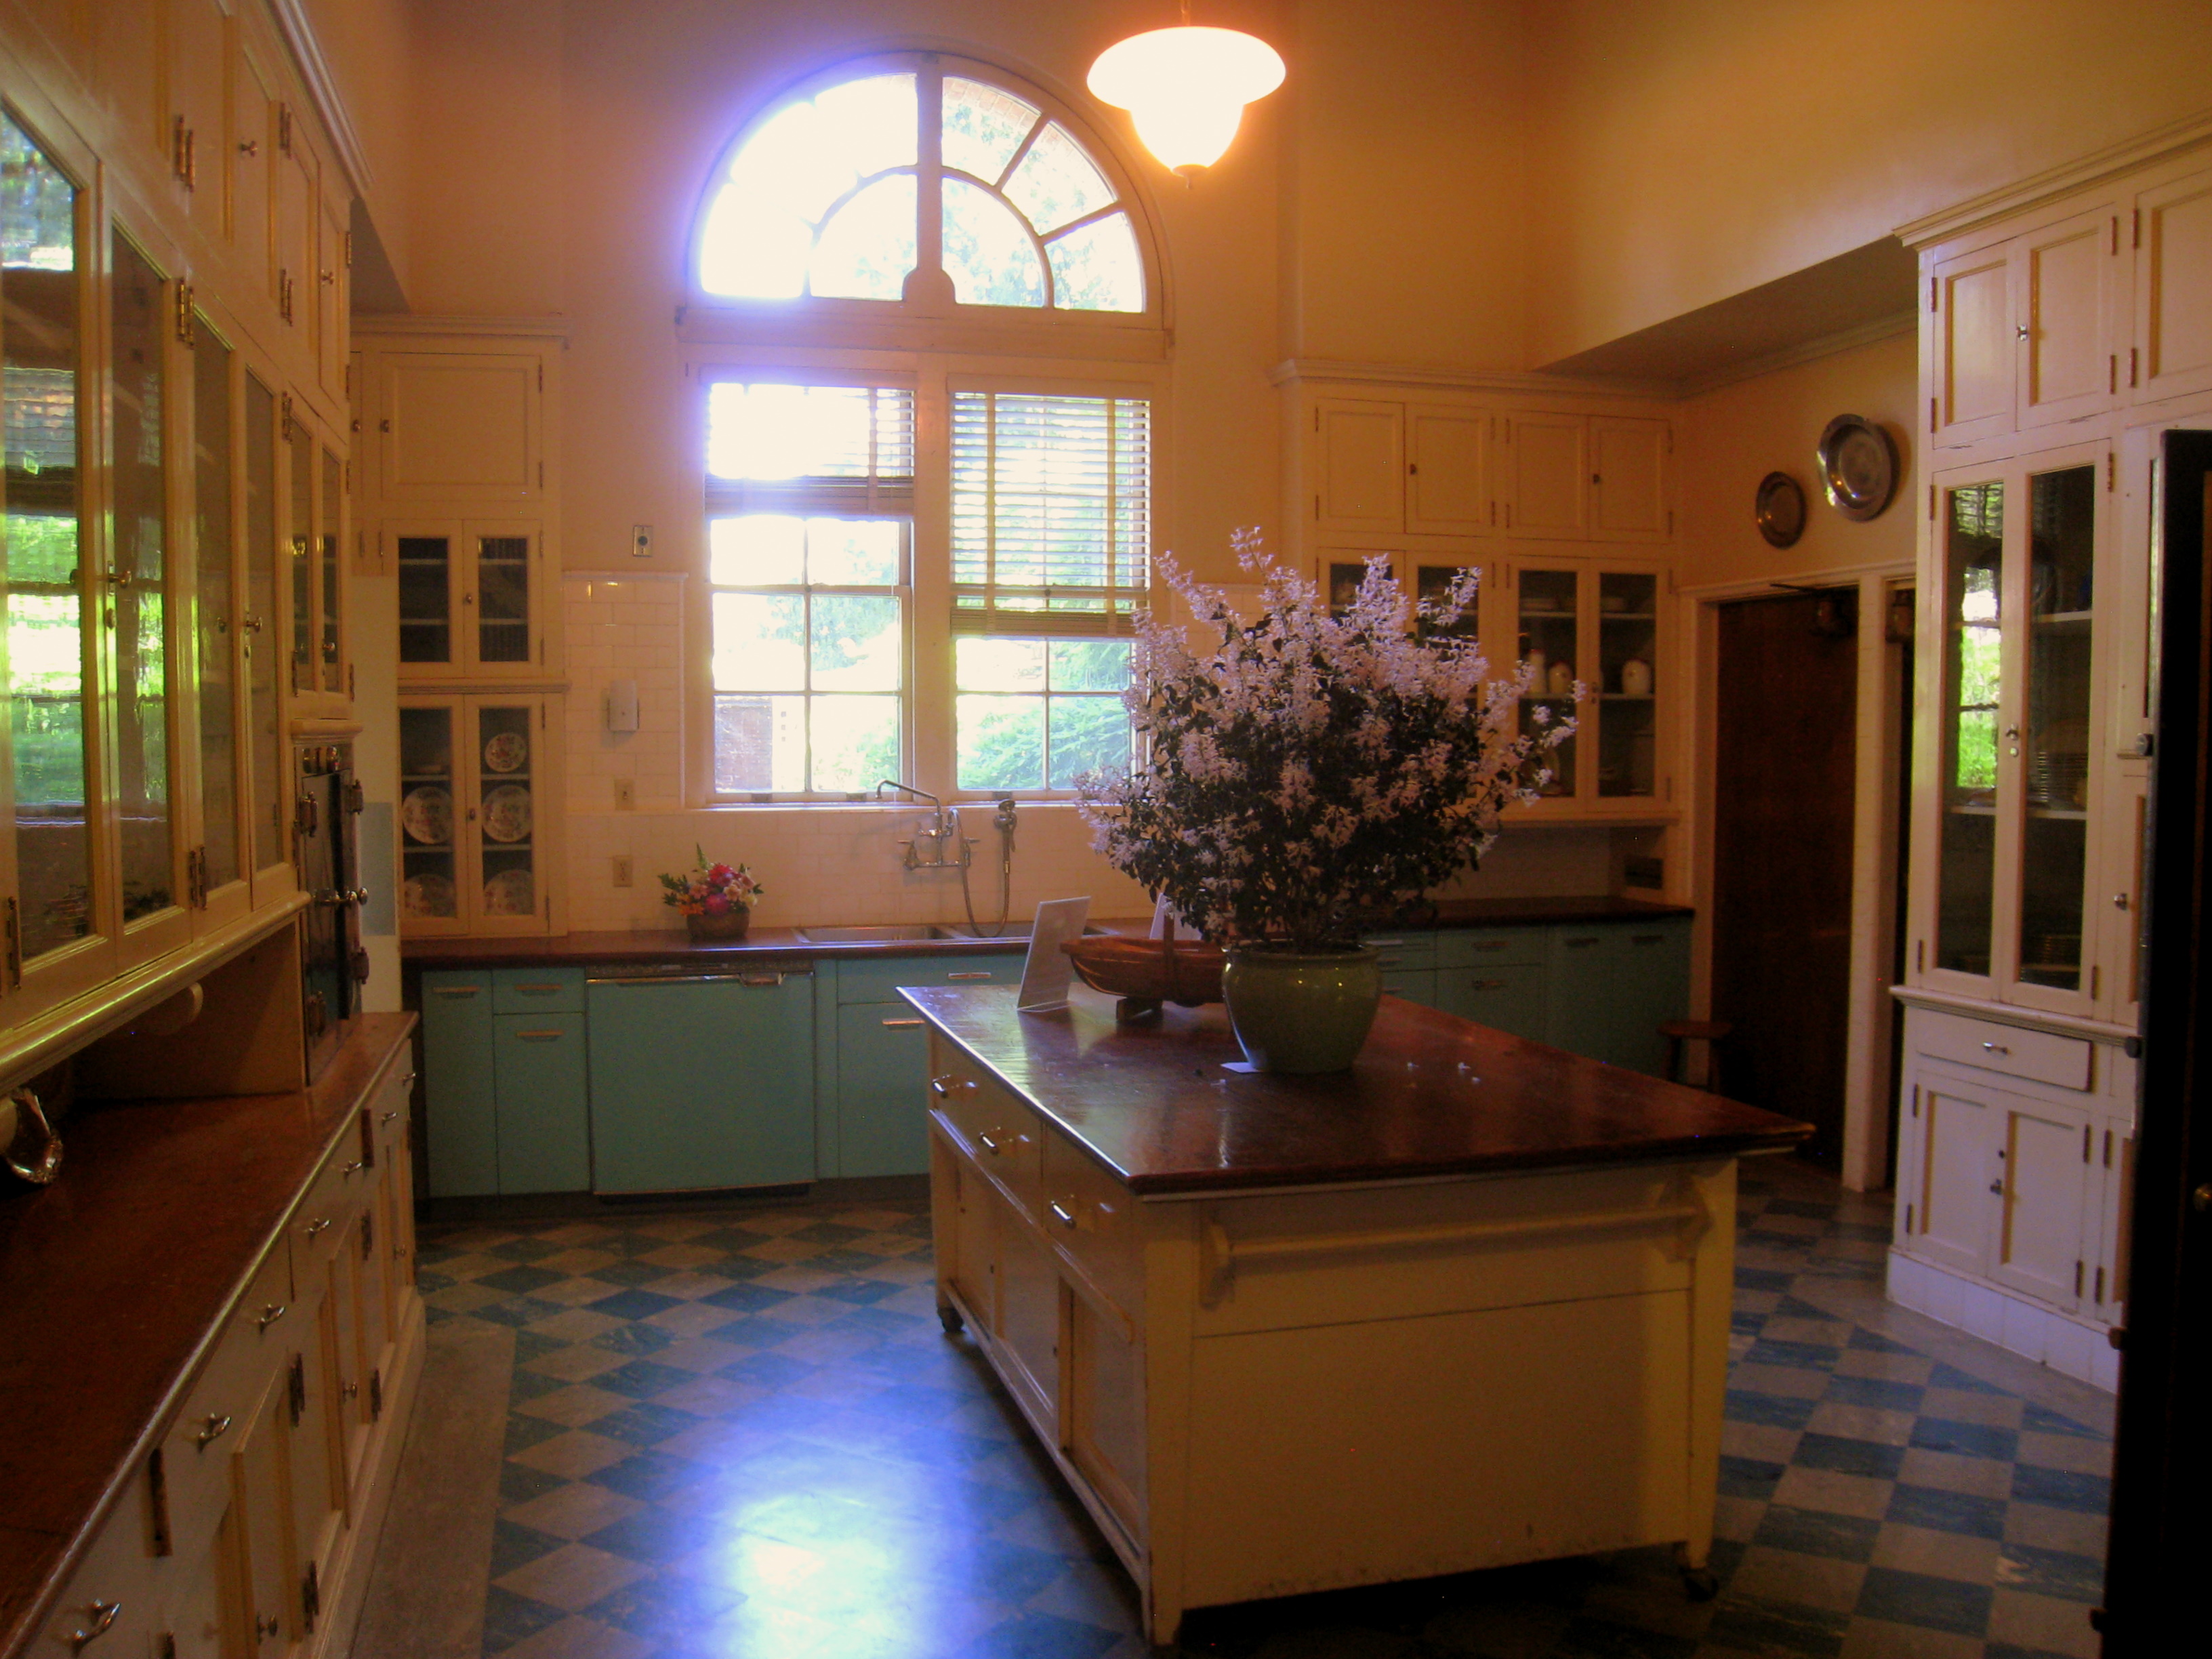 A modest kitchen era from the late 1880s with a large plant on the center island.